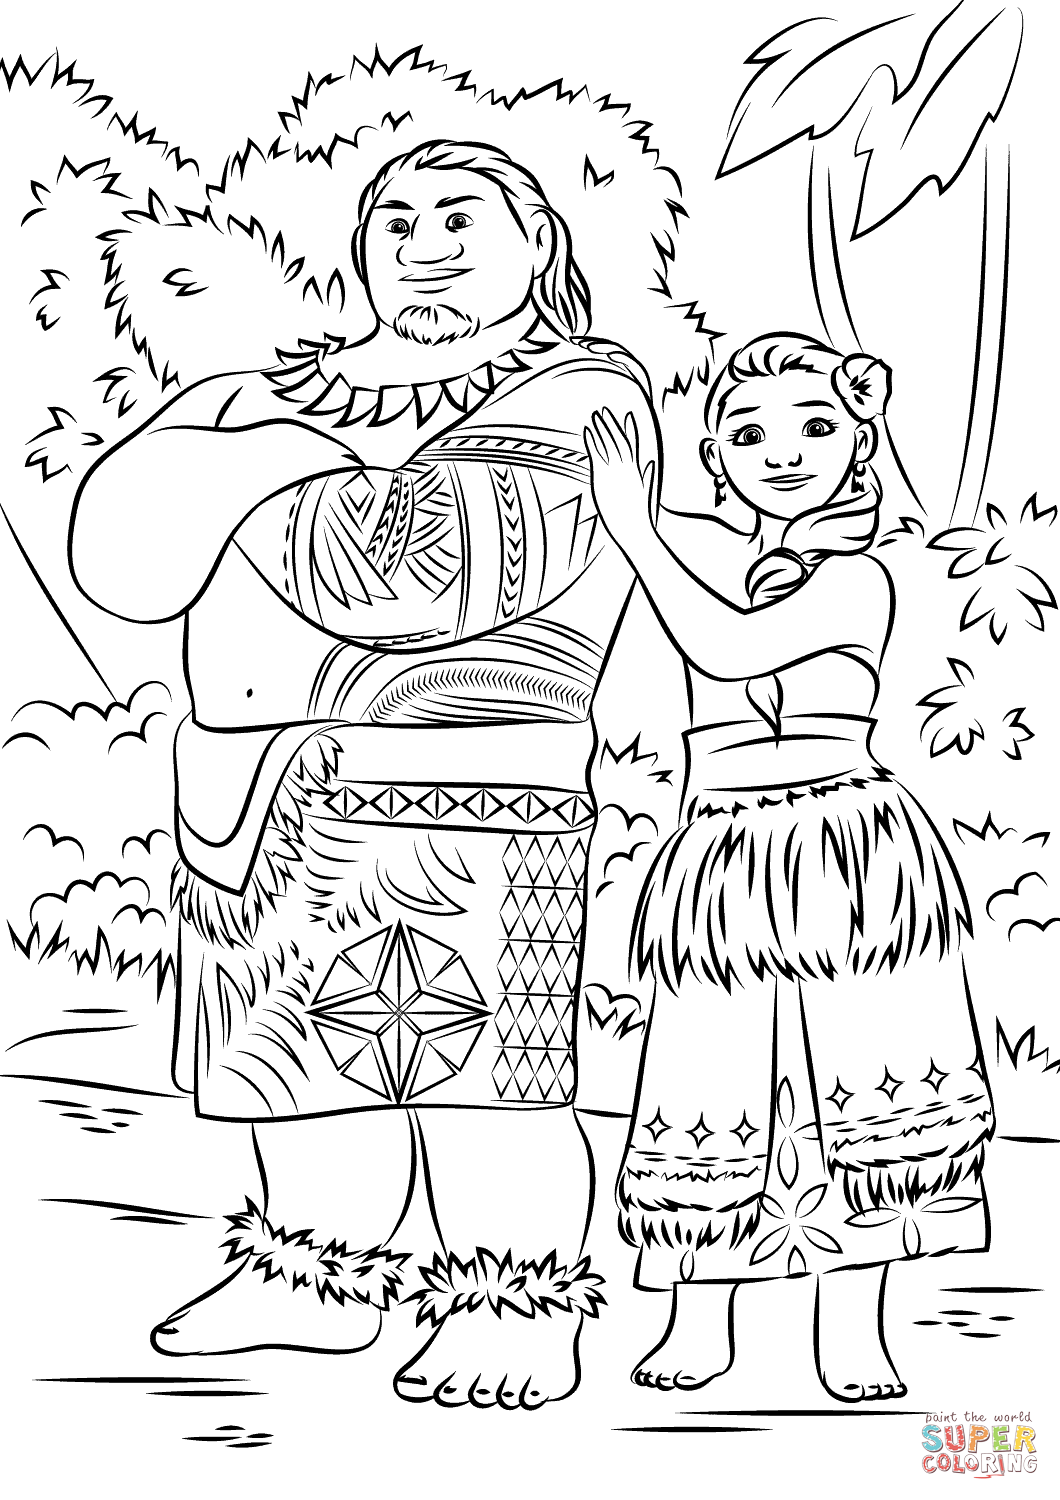 Tui and Sina from Moana coloring page | Free Printable Coloring Pages